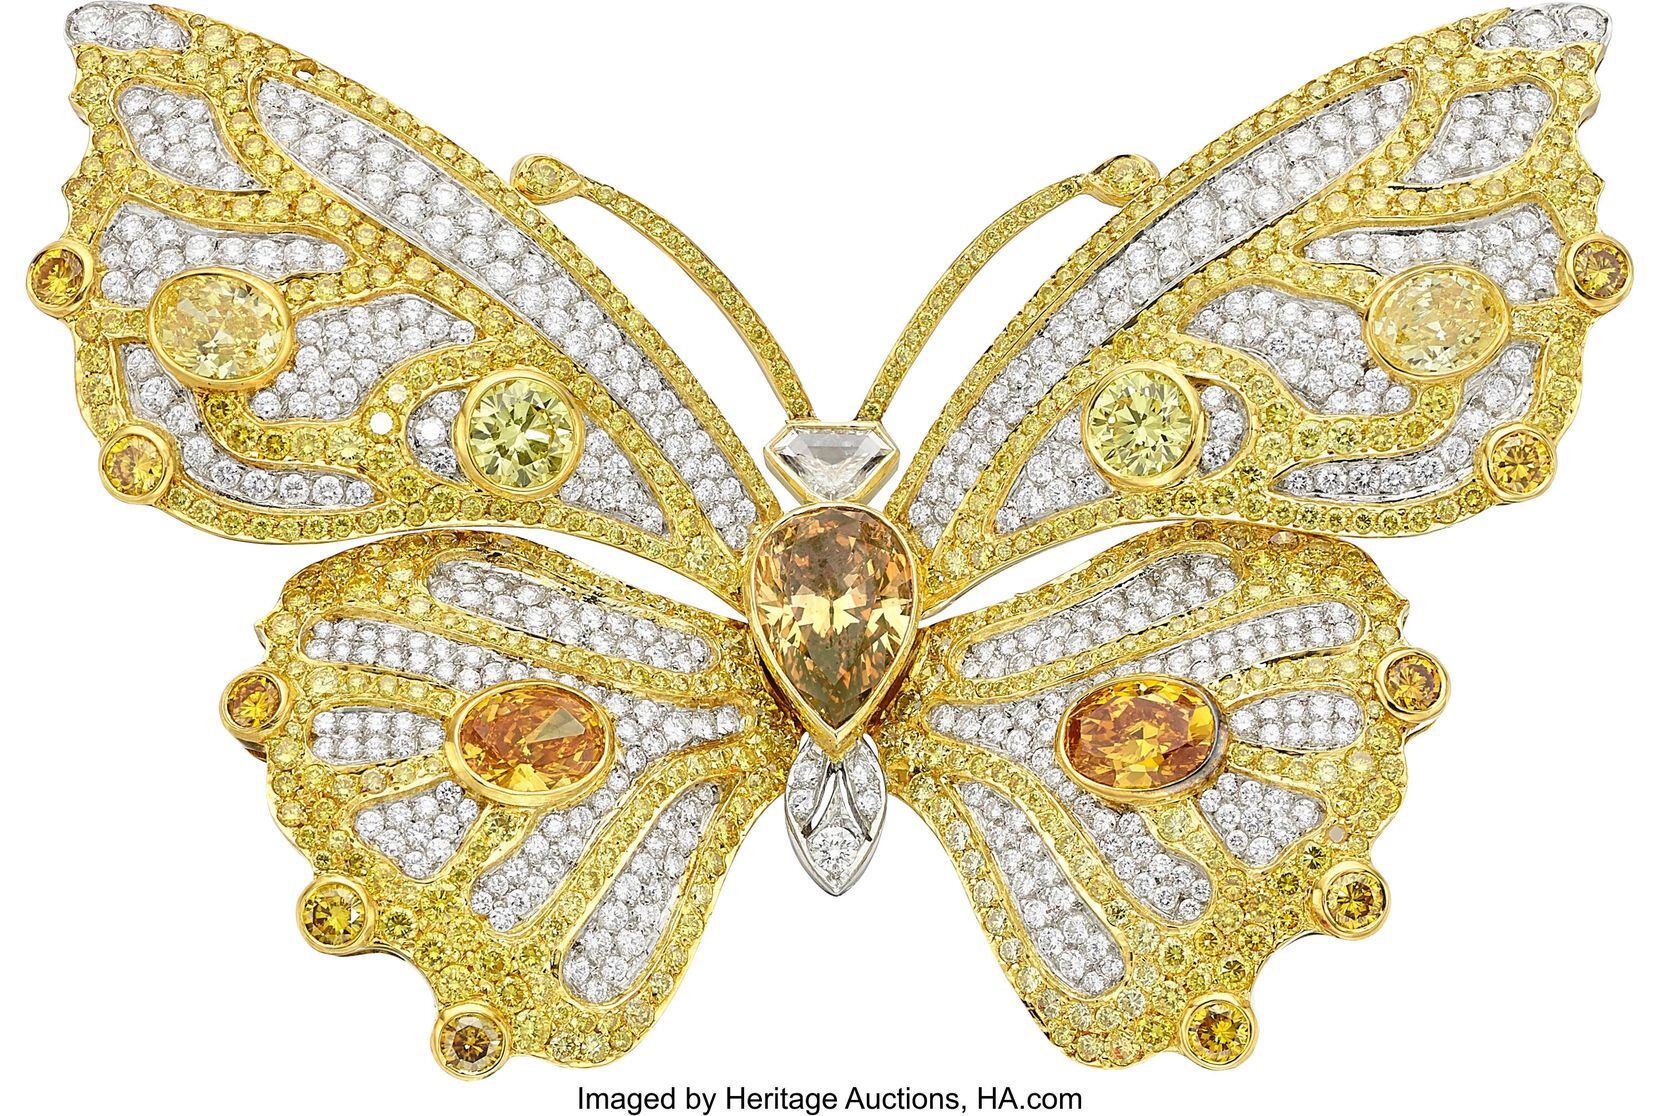 This butterfly broach from the Mary Anne Sammons Cree jewelry collection is one of 125...